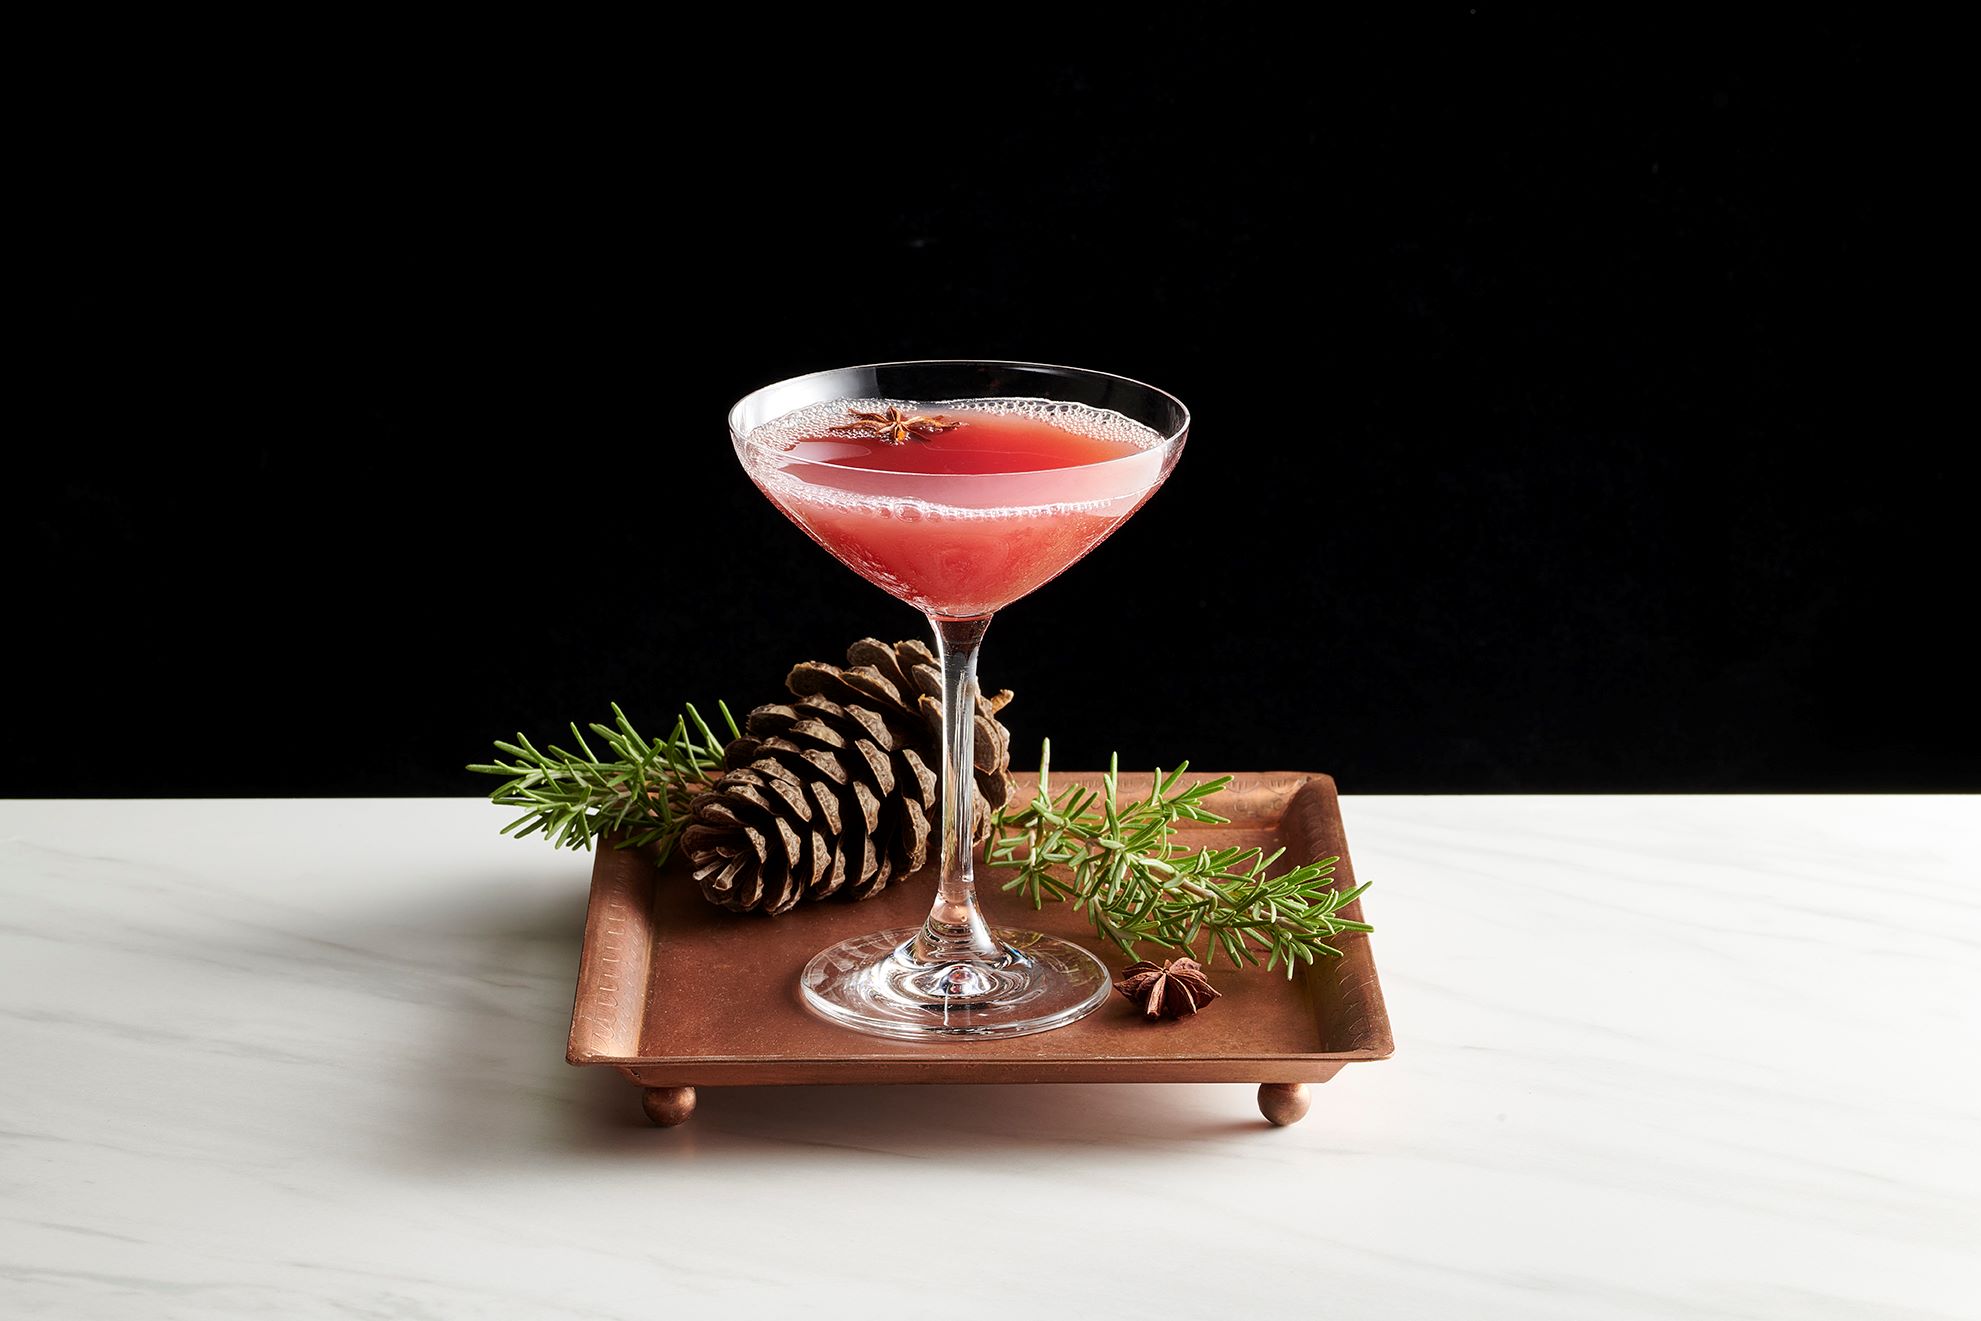 An image of the Santa's Sleigh Ride holiday cocktail at Del Frisco's Double Eagle